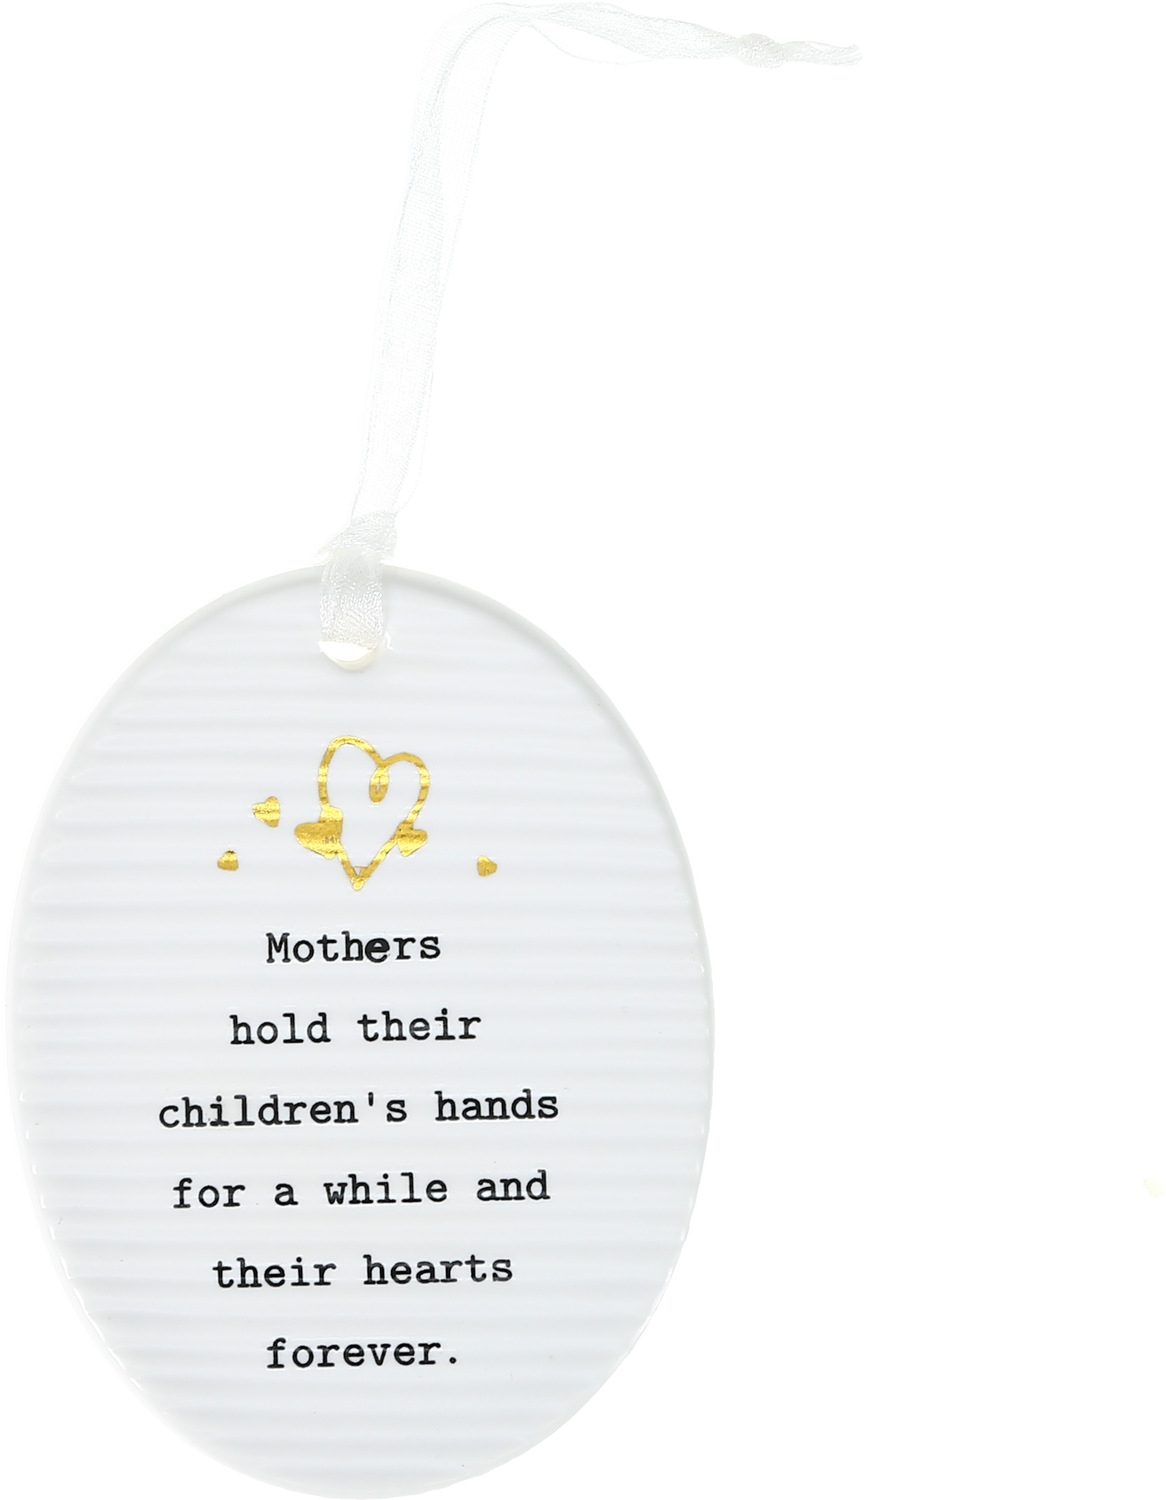 Mothers by Thoughtful Words - Mothers - 3.5" Hanging Oval Plaque